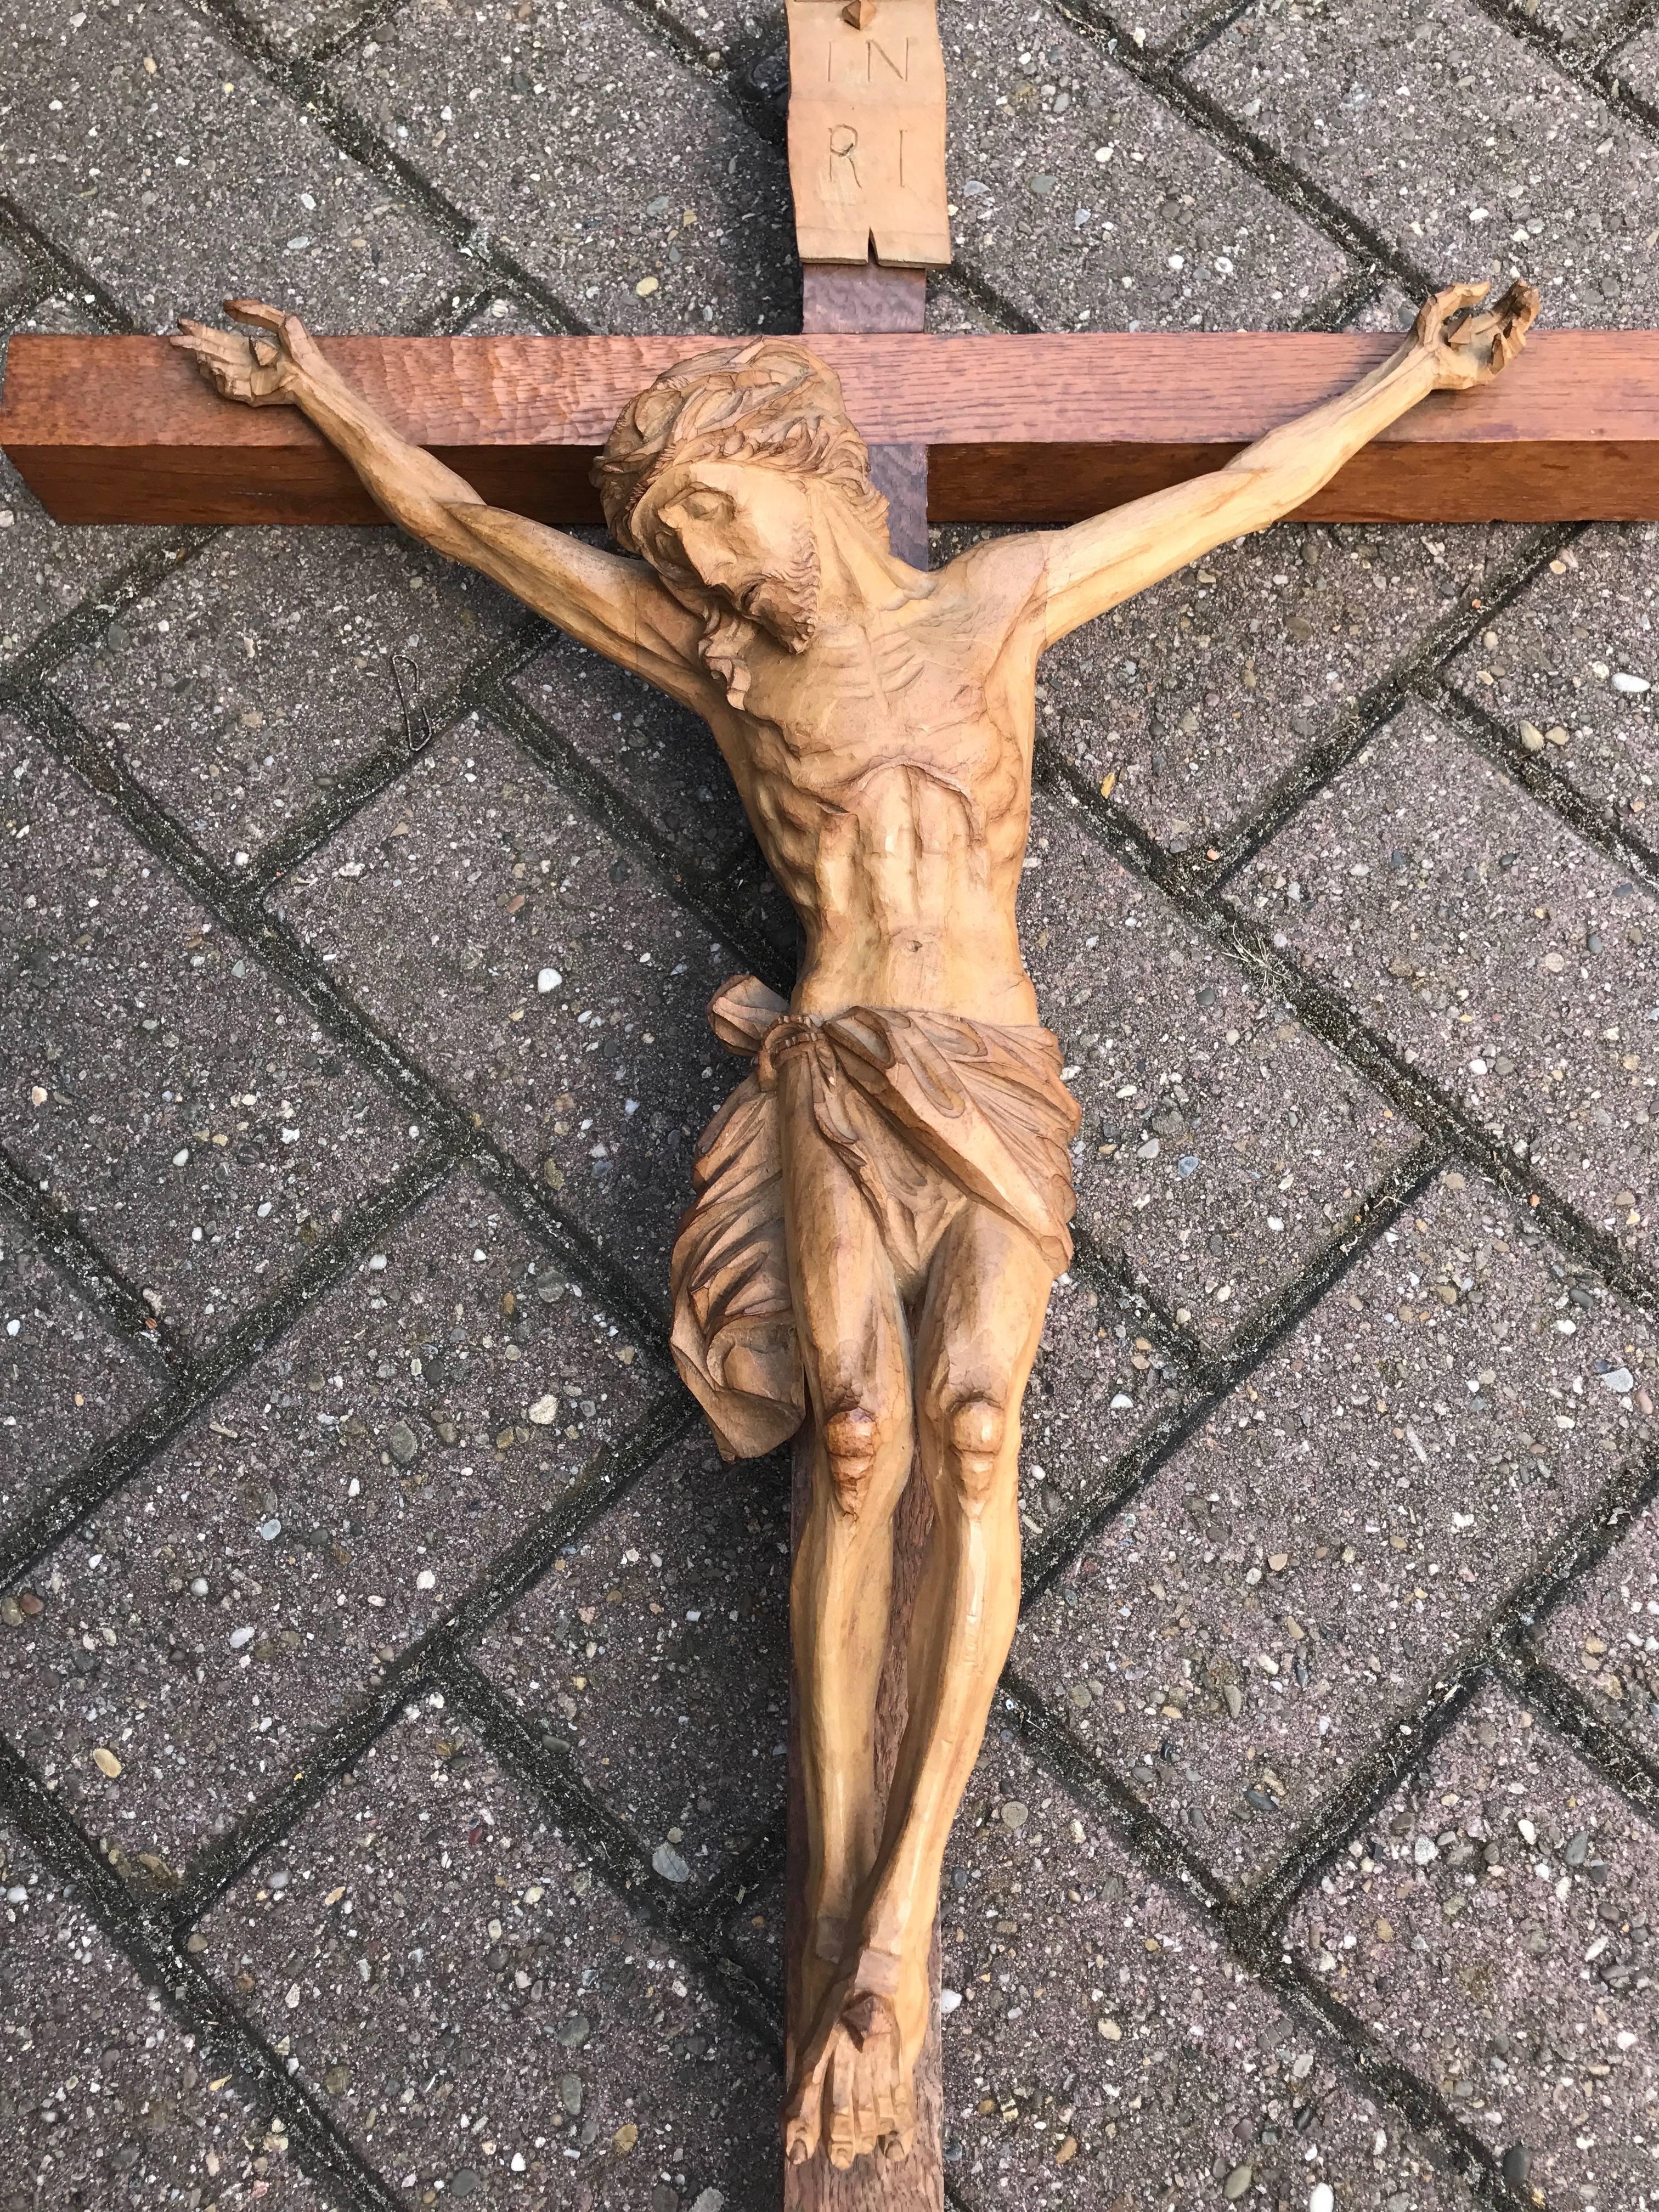 Amazing sculpture and a religious work of art. 

The suffering of Christ that radiates from this sculpture can be difficult to look at. The agony in his facial expression, the tendons on his arms and legs and the total lack of flesh on his bones